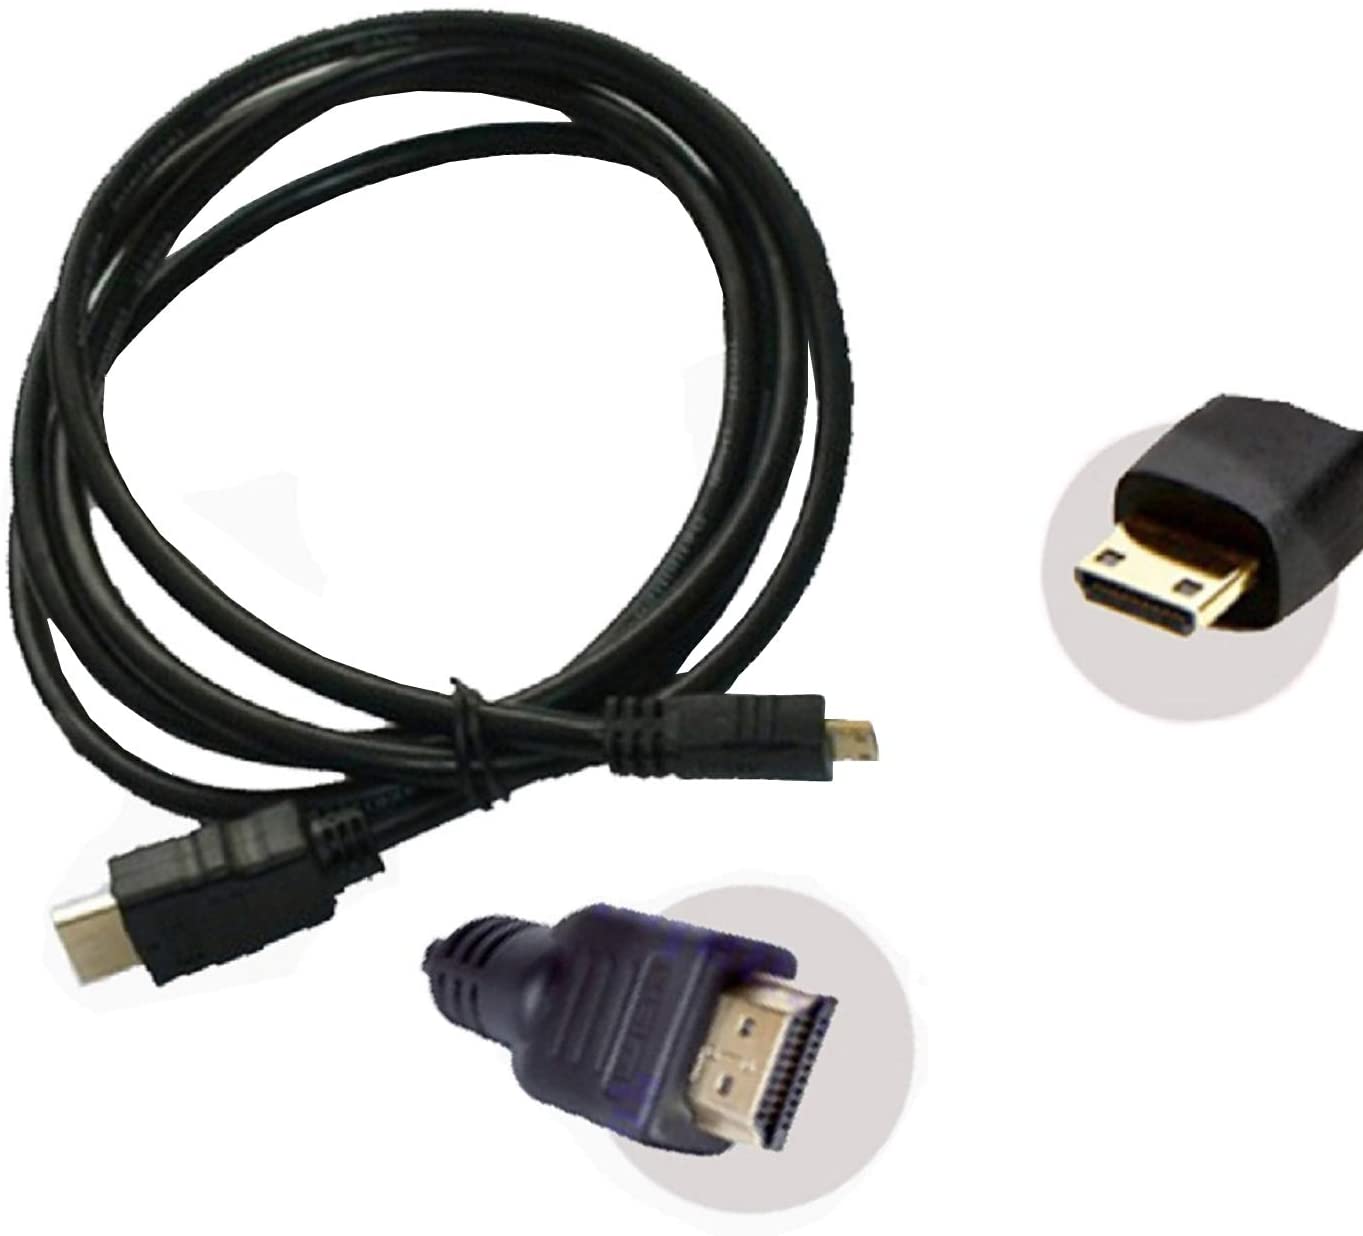 UPBRIGHT HDMI HDTV TV Audio Video AV Cable Cord Lead For TOPI T80 Multi Touch Screen WIFI Android Tablet PC - image 1 of 5